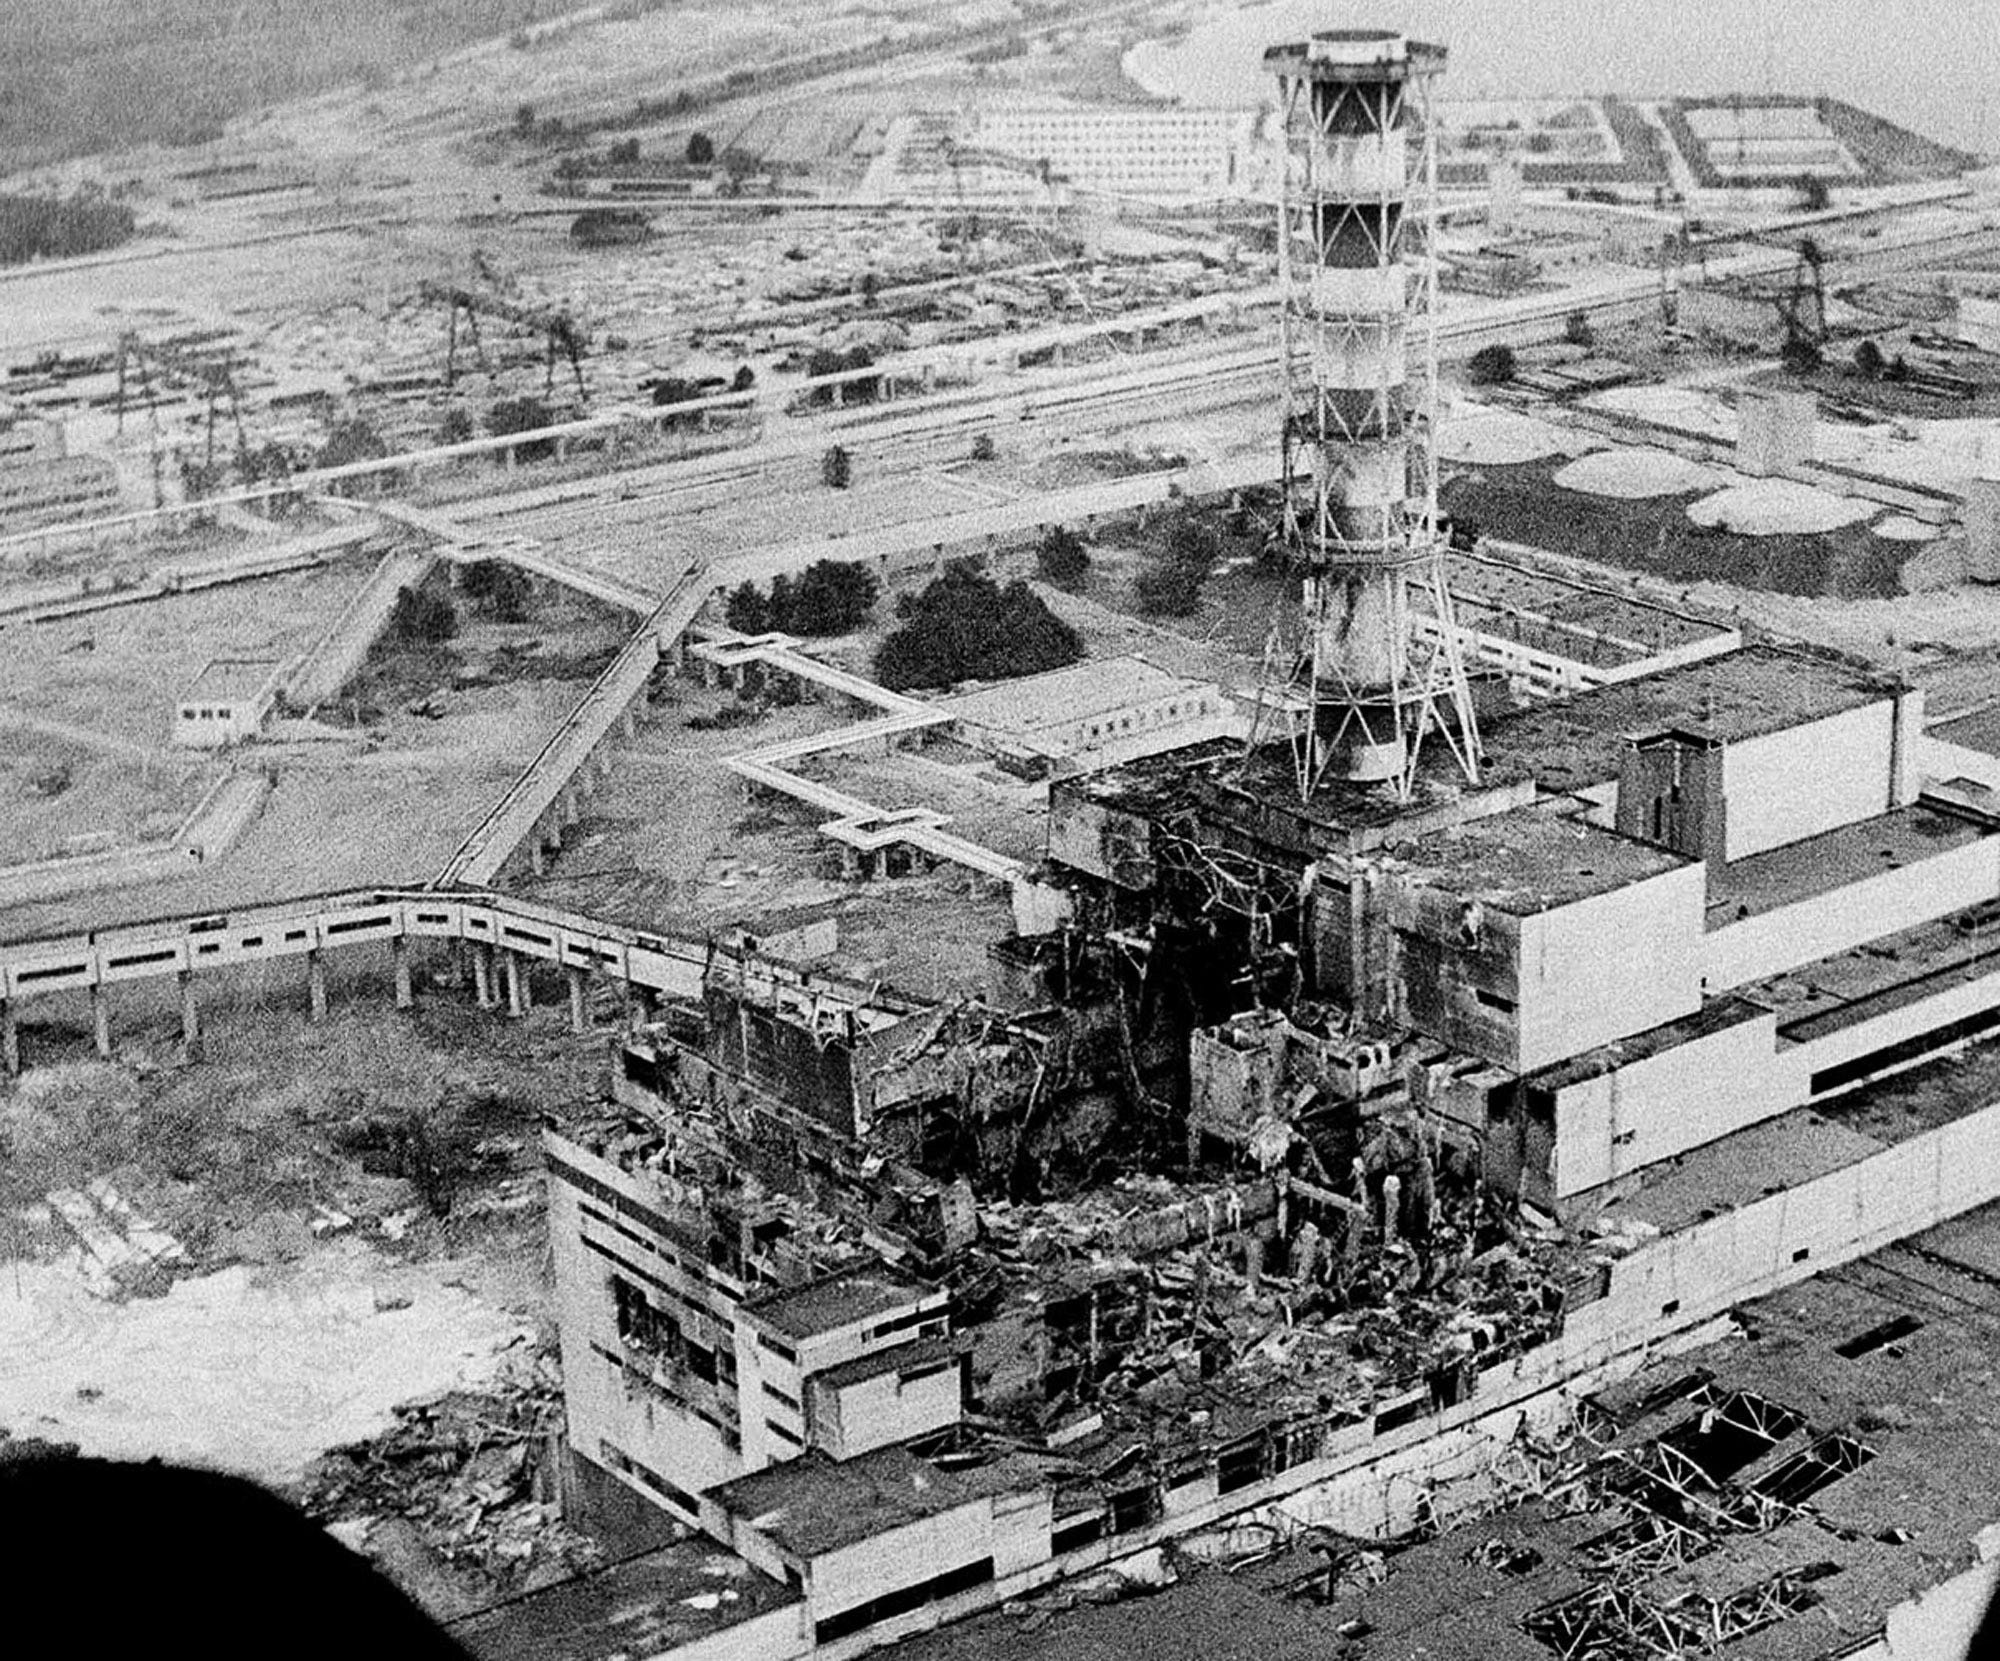 Chernobyl catastrophic, but nuclear power is safe and